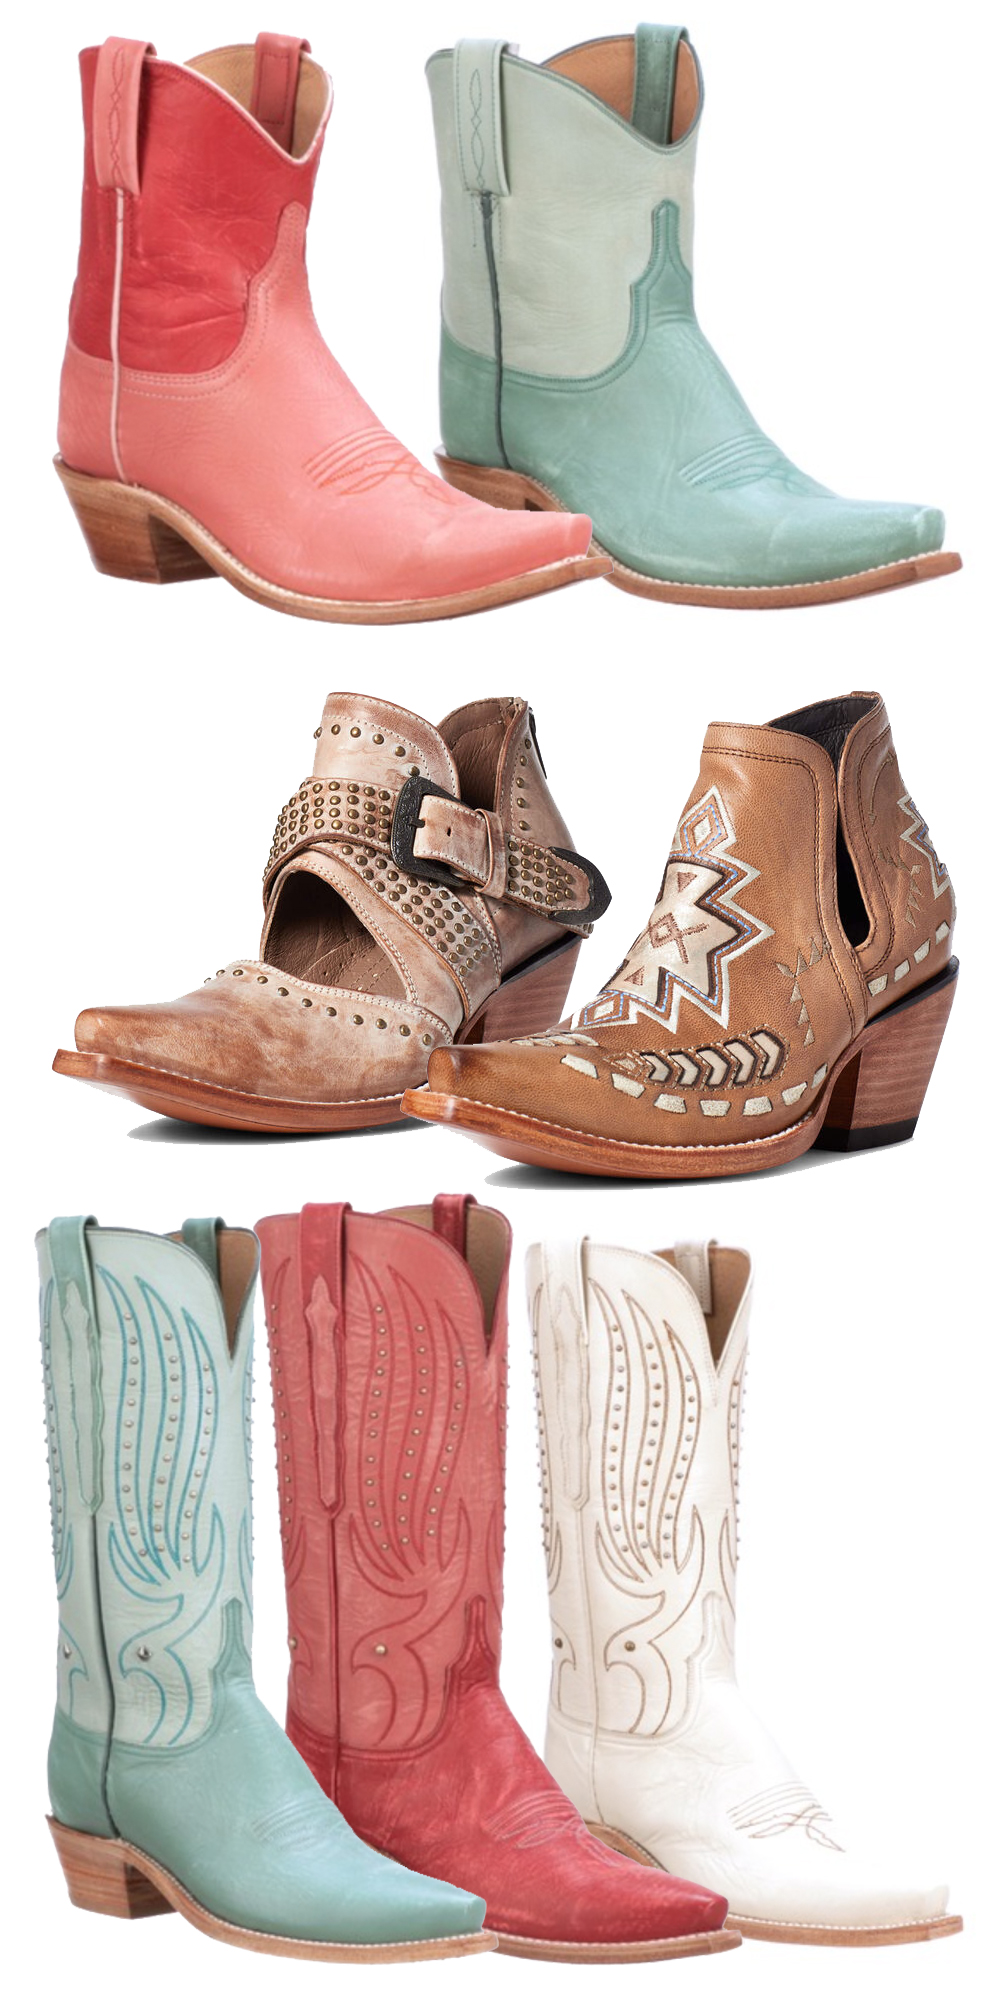 Spring cowboy boots in fun colors